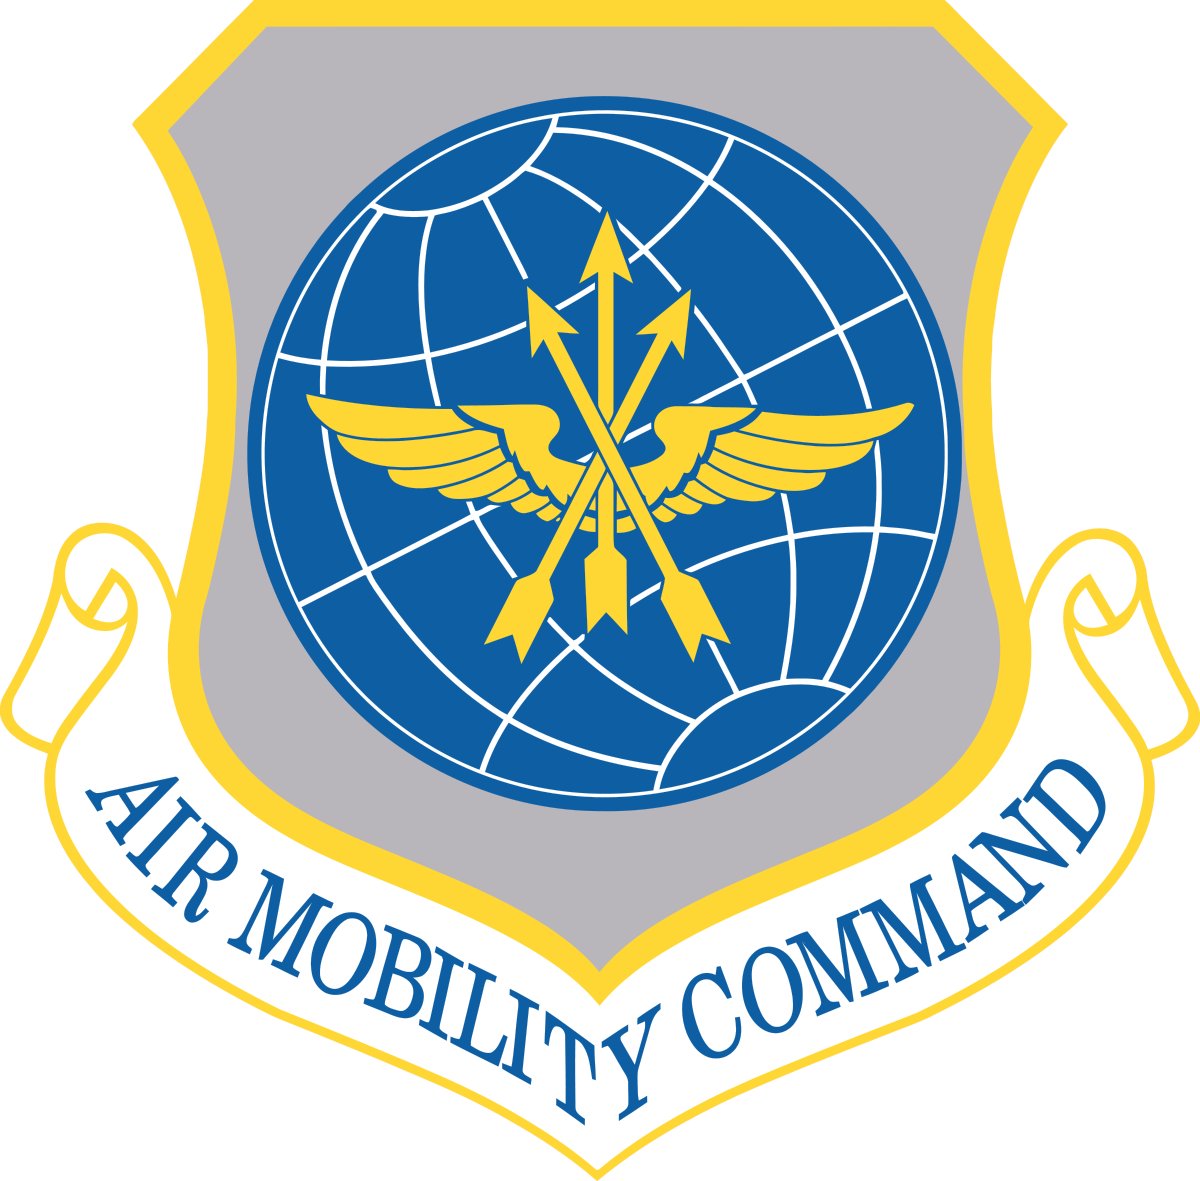 #HappyBirthday @AirMobilityCmd #MobilityAirmen, you don't look a day over 79...#TogetherWeDeliver #Happy80